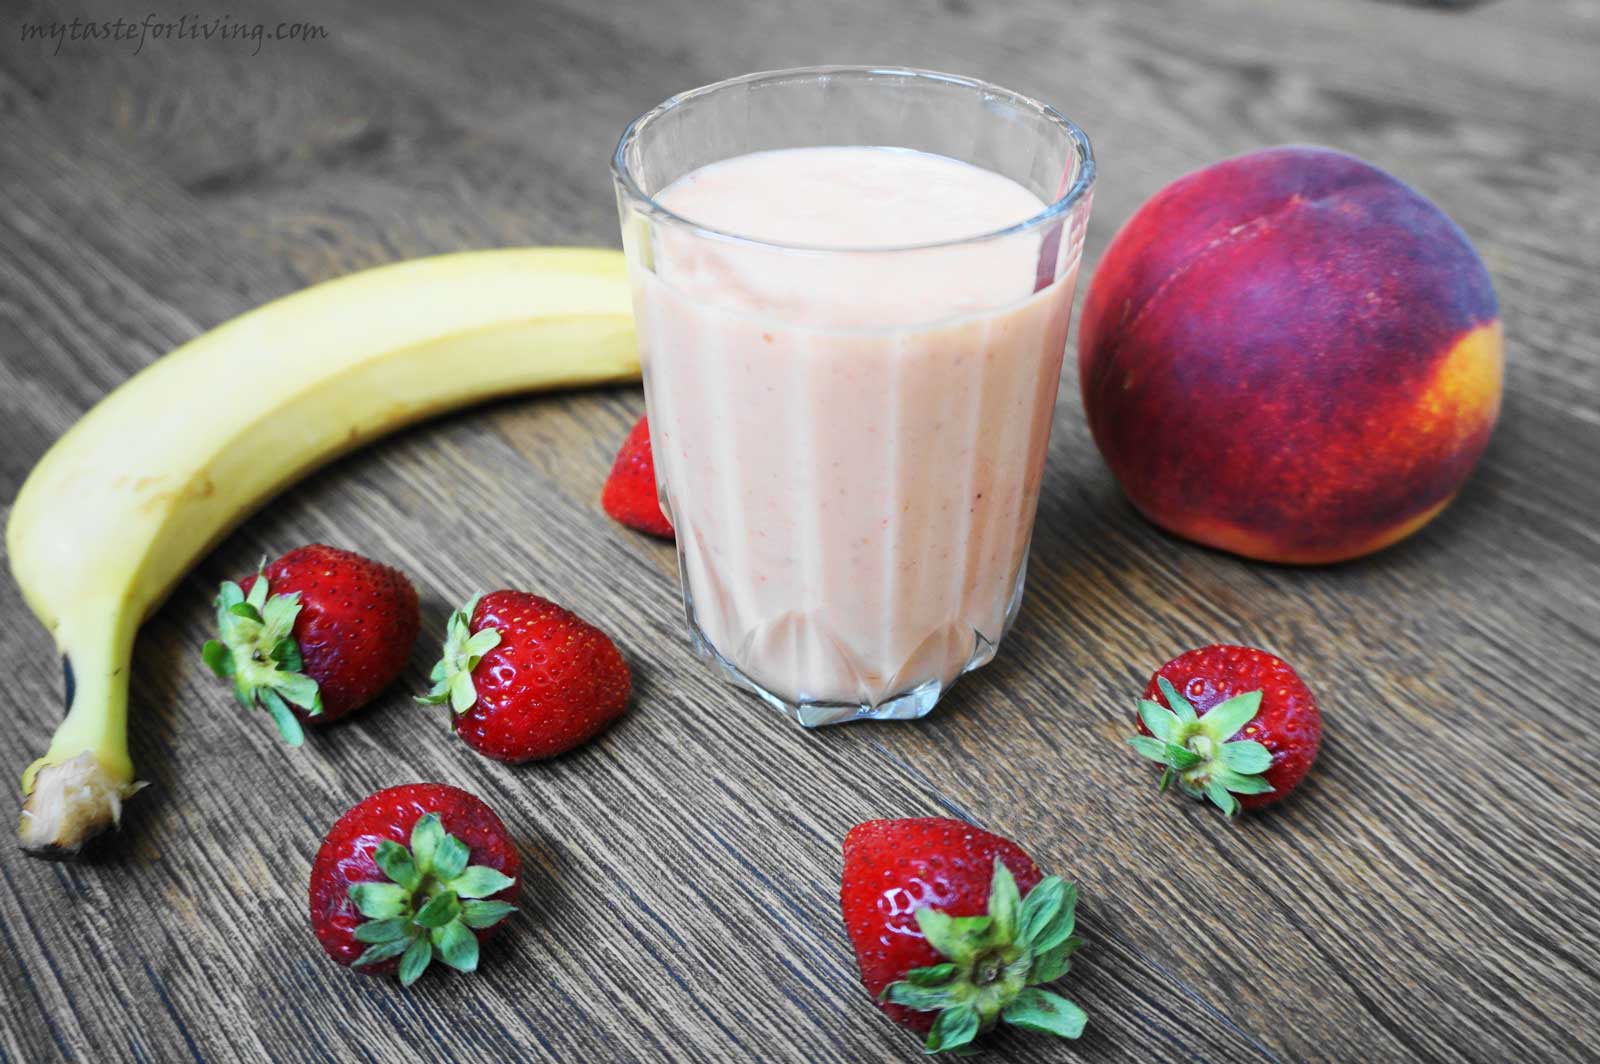 Delicious and fresh smoothie prepared with peach, banana, strawberries, honey, yogurt and coconut oil. 